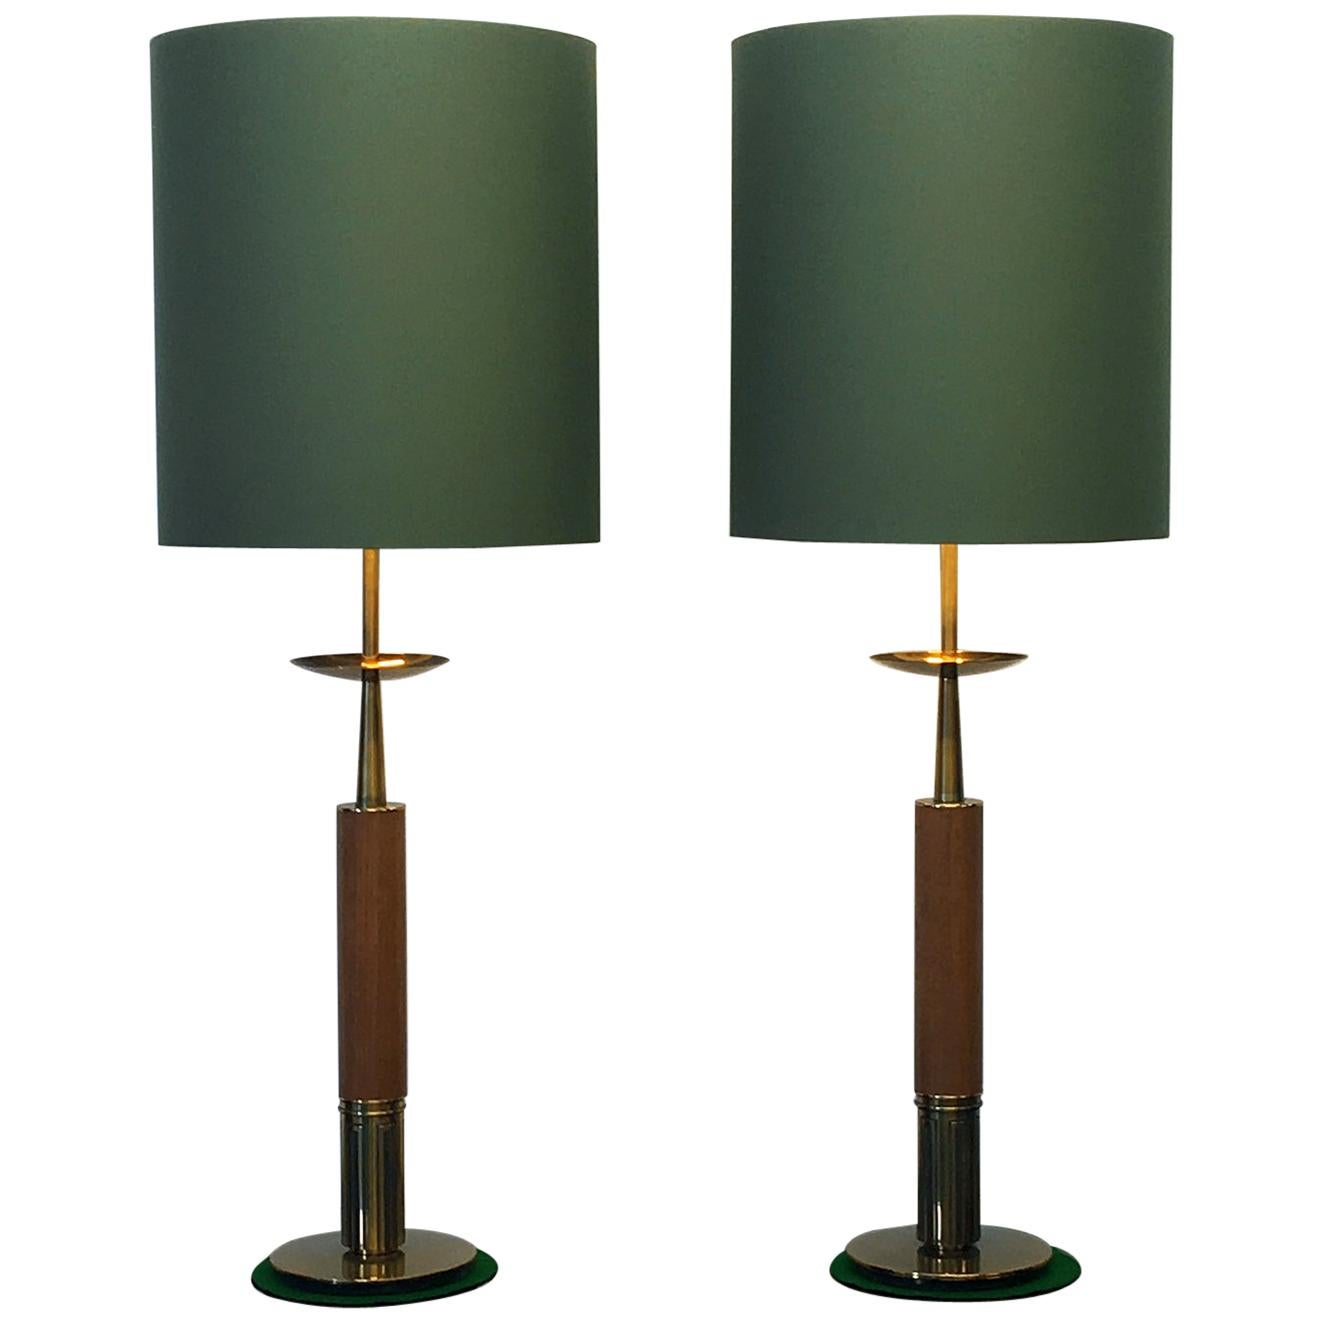 Large Pair of 1960s American Midcentury Table Lamps, the Stiffel Lamp Company